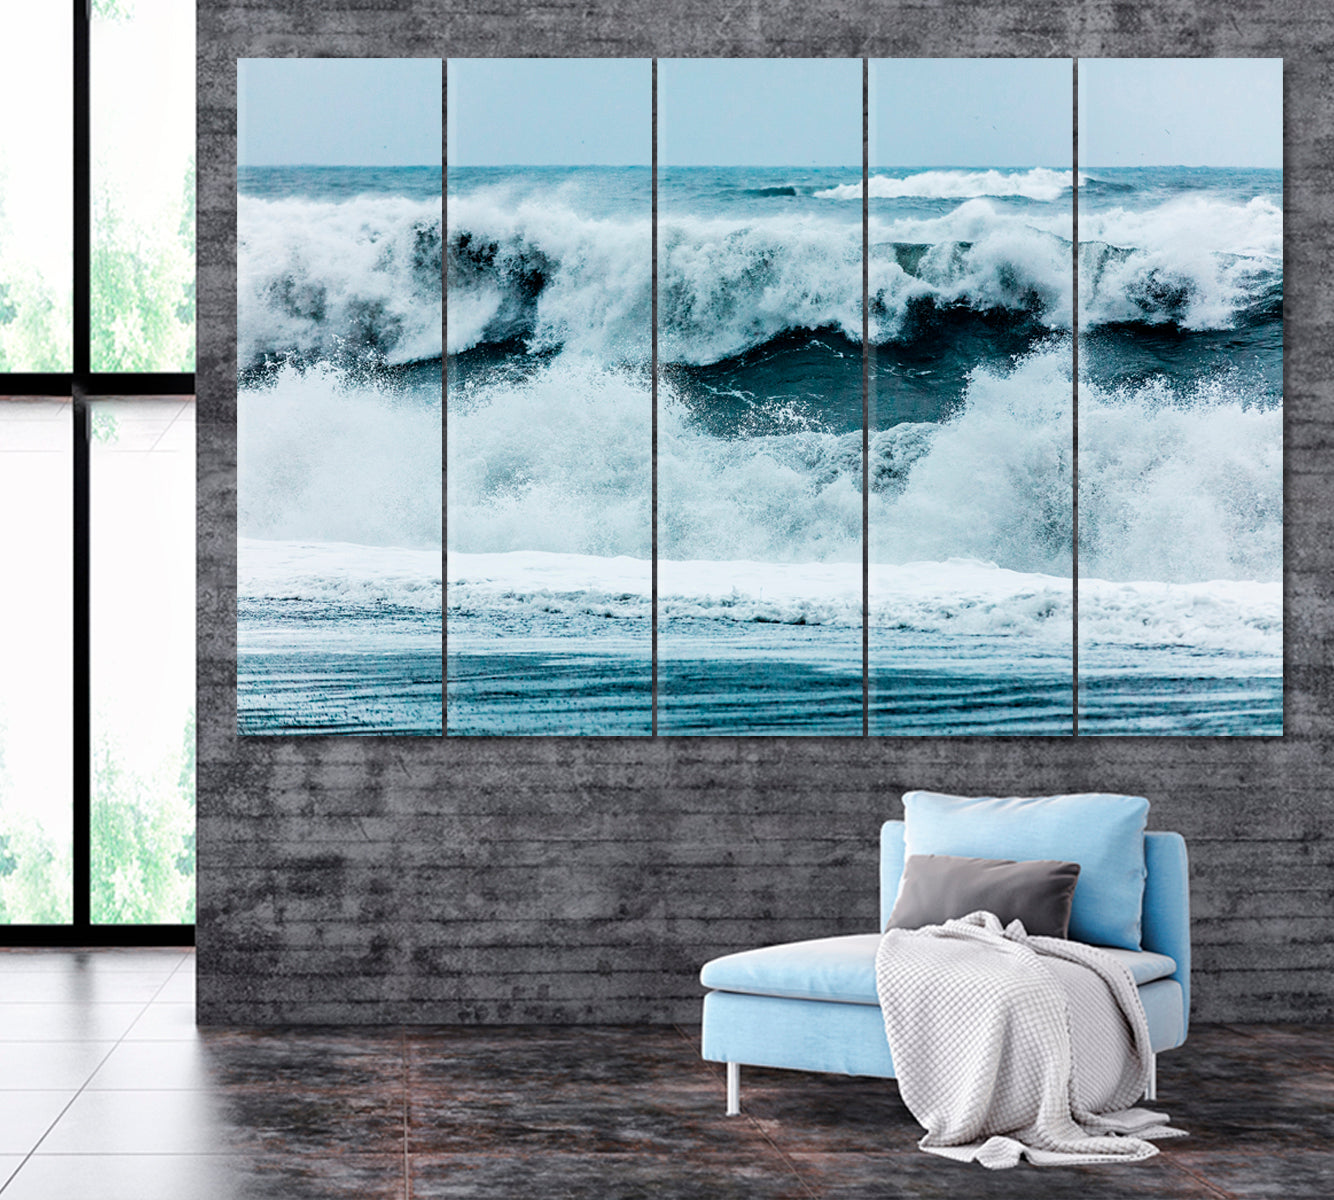 Stormy Waves on Vik Beach Iceland Canvas Print ArtLexy 5 Panels 36"x24" inches 